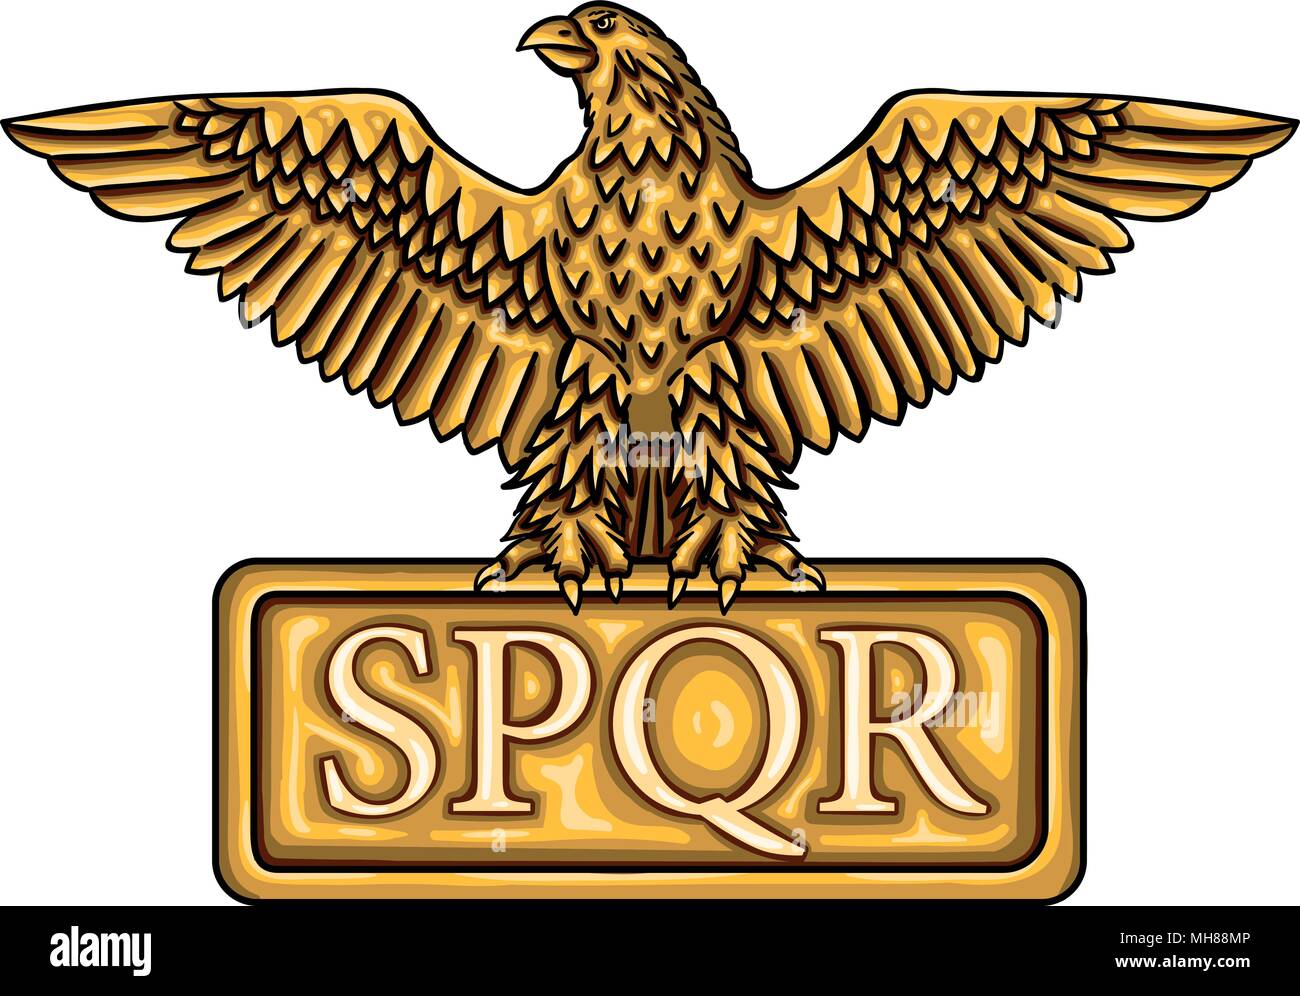 Spqr Rome Flag You may do so in any reasonable manner but not in any way